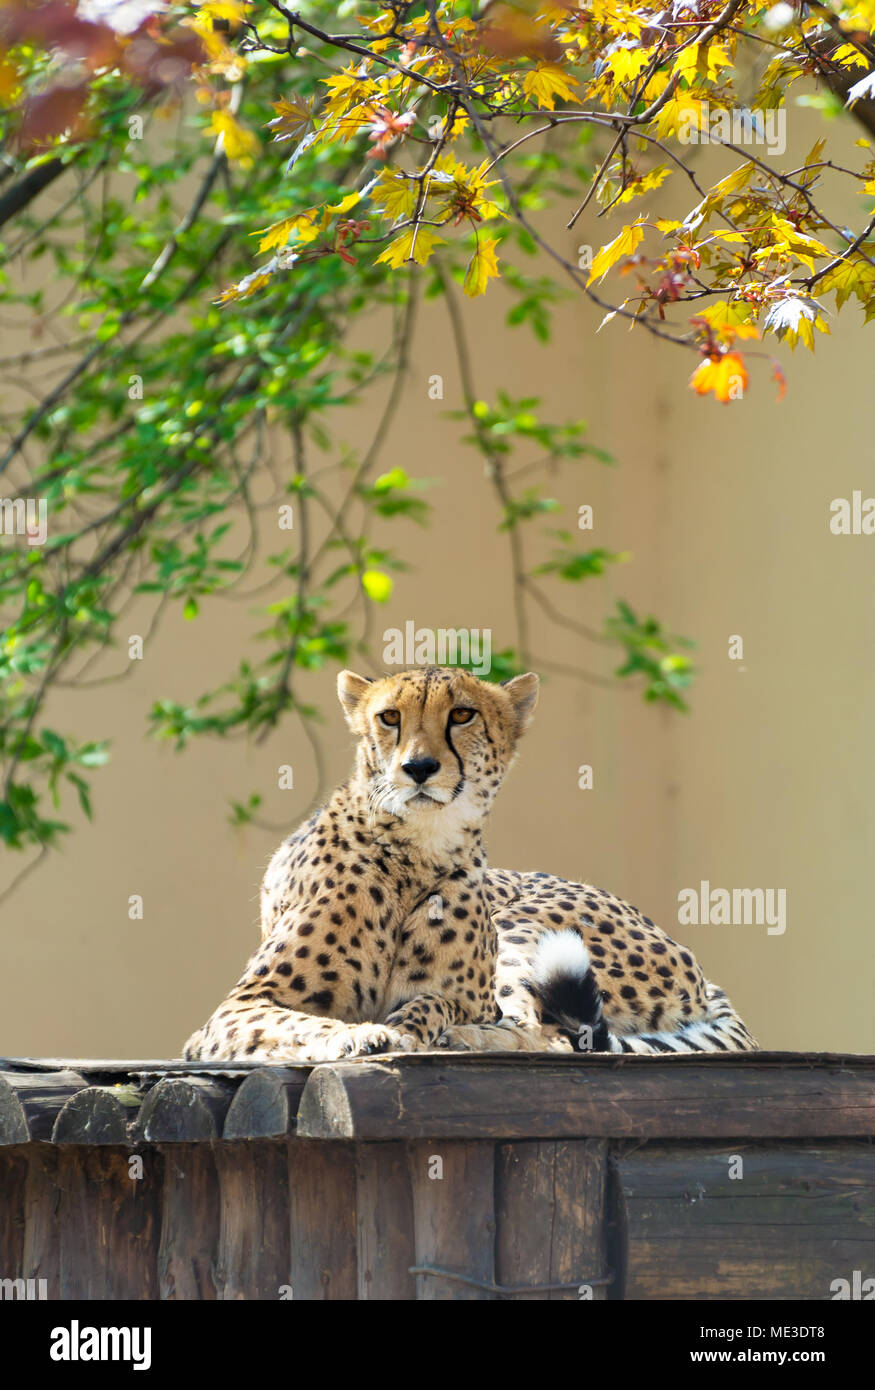 A statue of a sitting cheetah made of wood staring at the camera. : r/dalle2